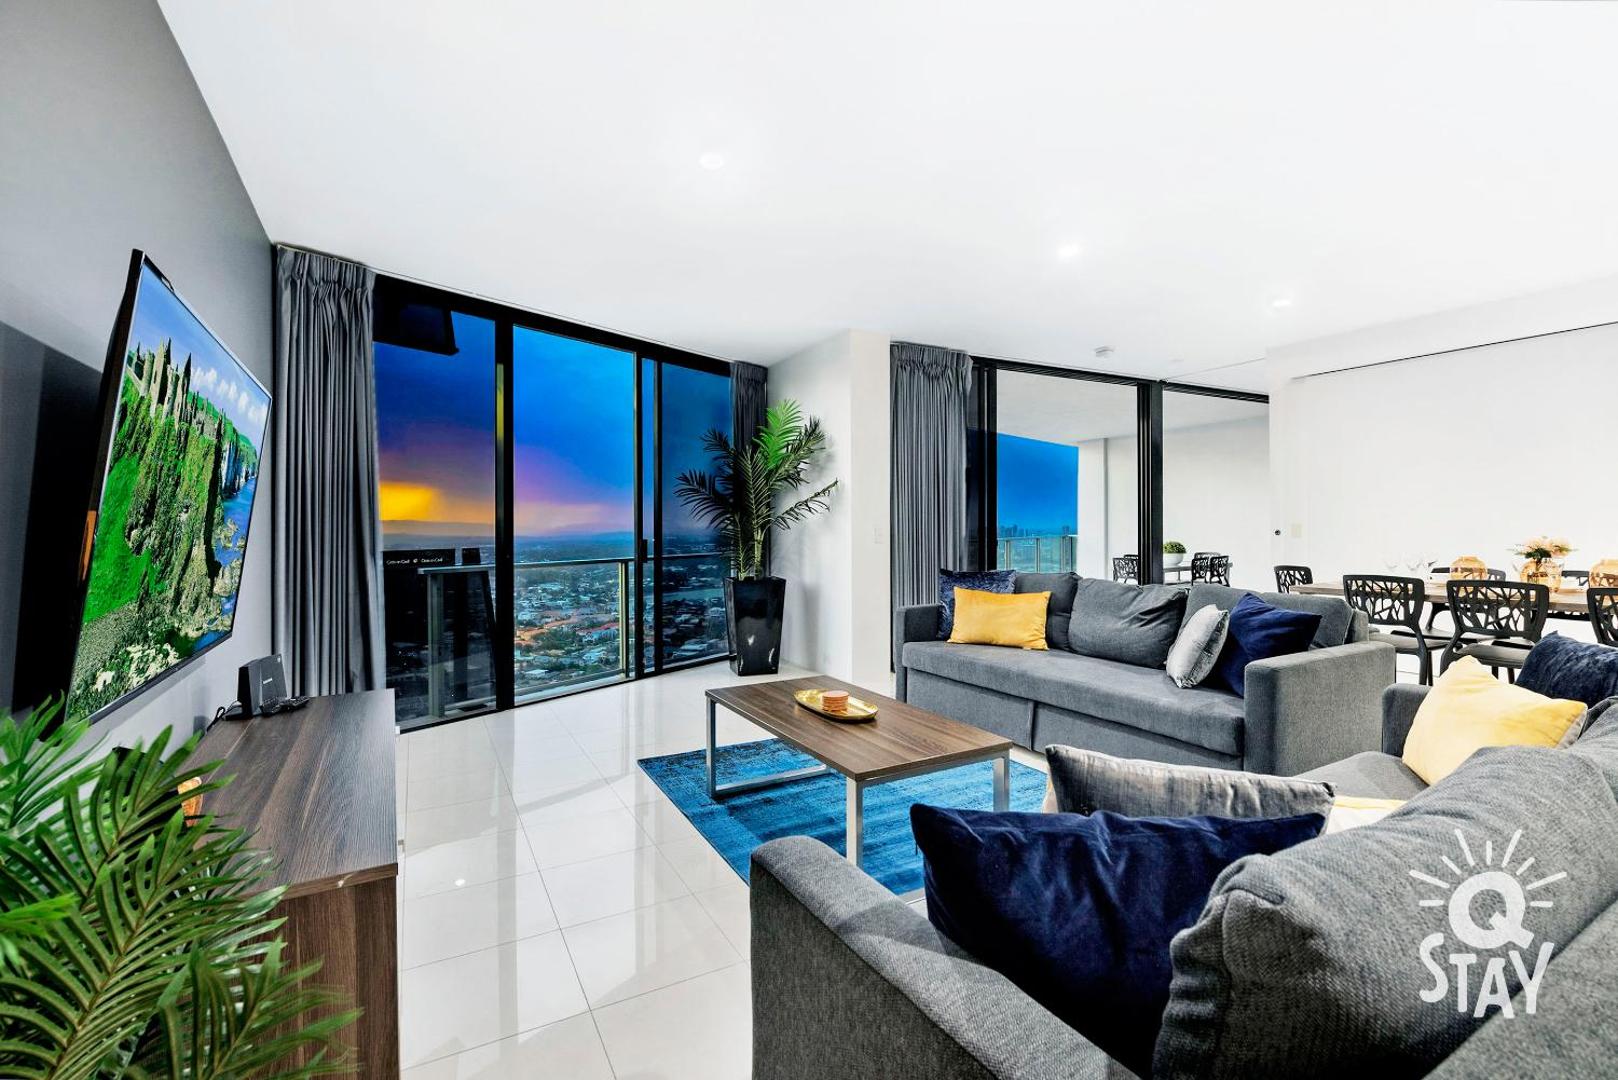 LIMITED 7 NIGHT DEAL in SPA 3 Bedroom Sub Penthouses at Circle on Cavill – KIDS STAY FREE!!!